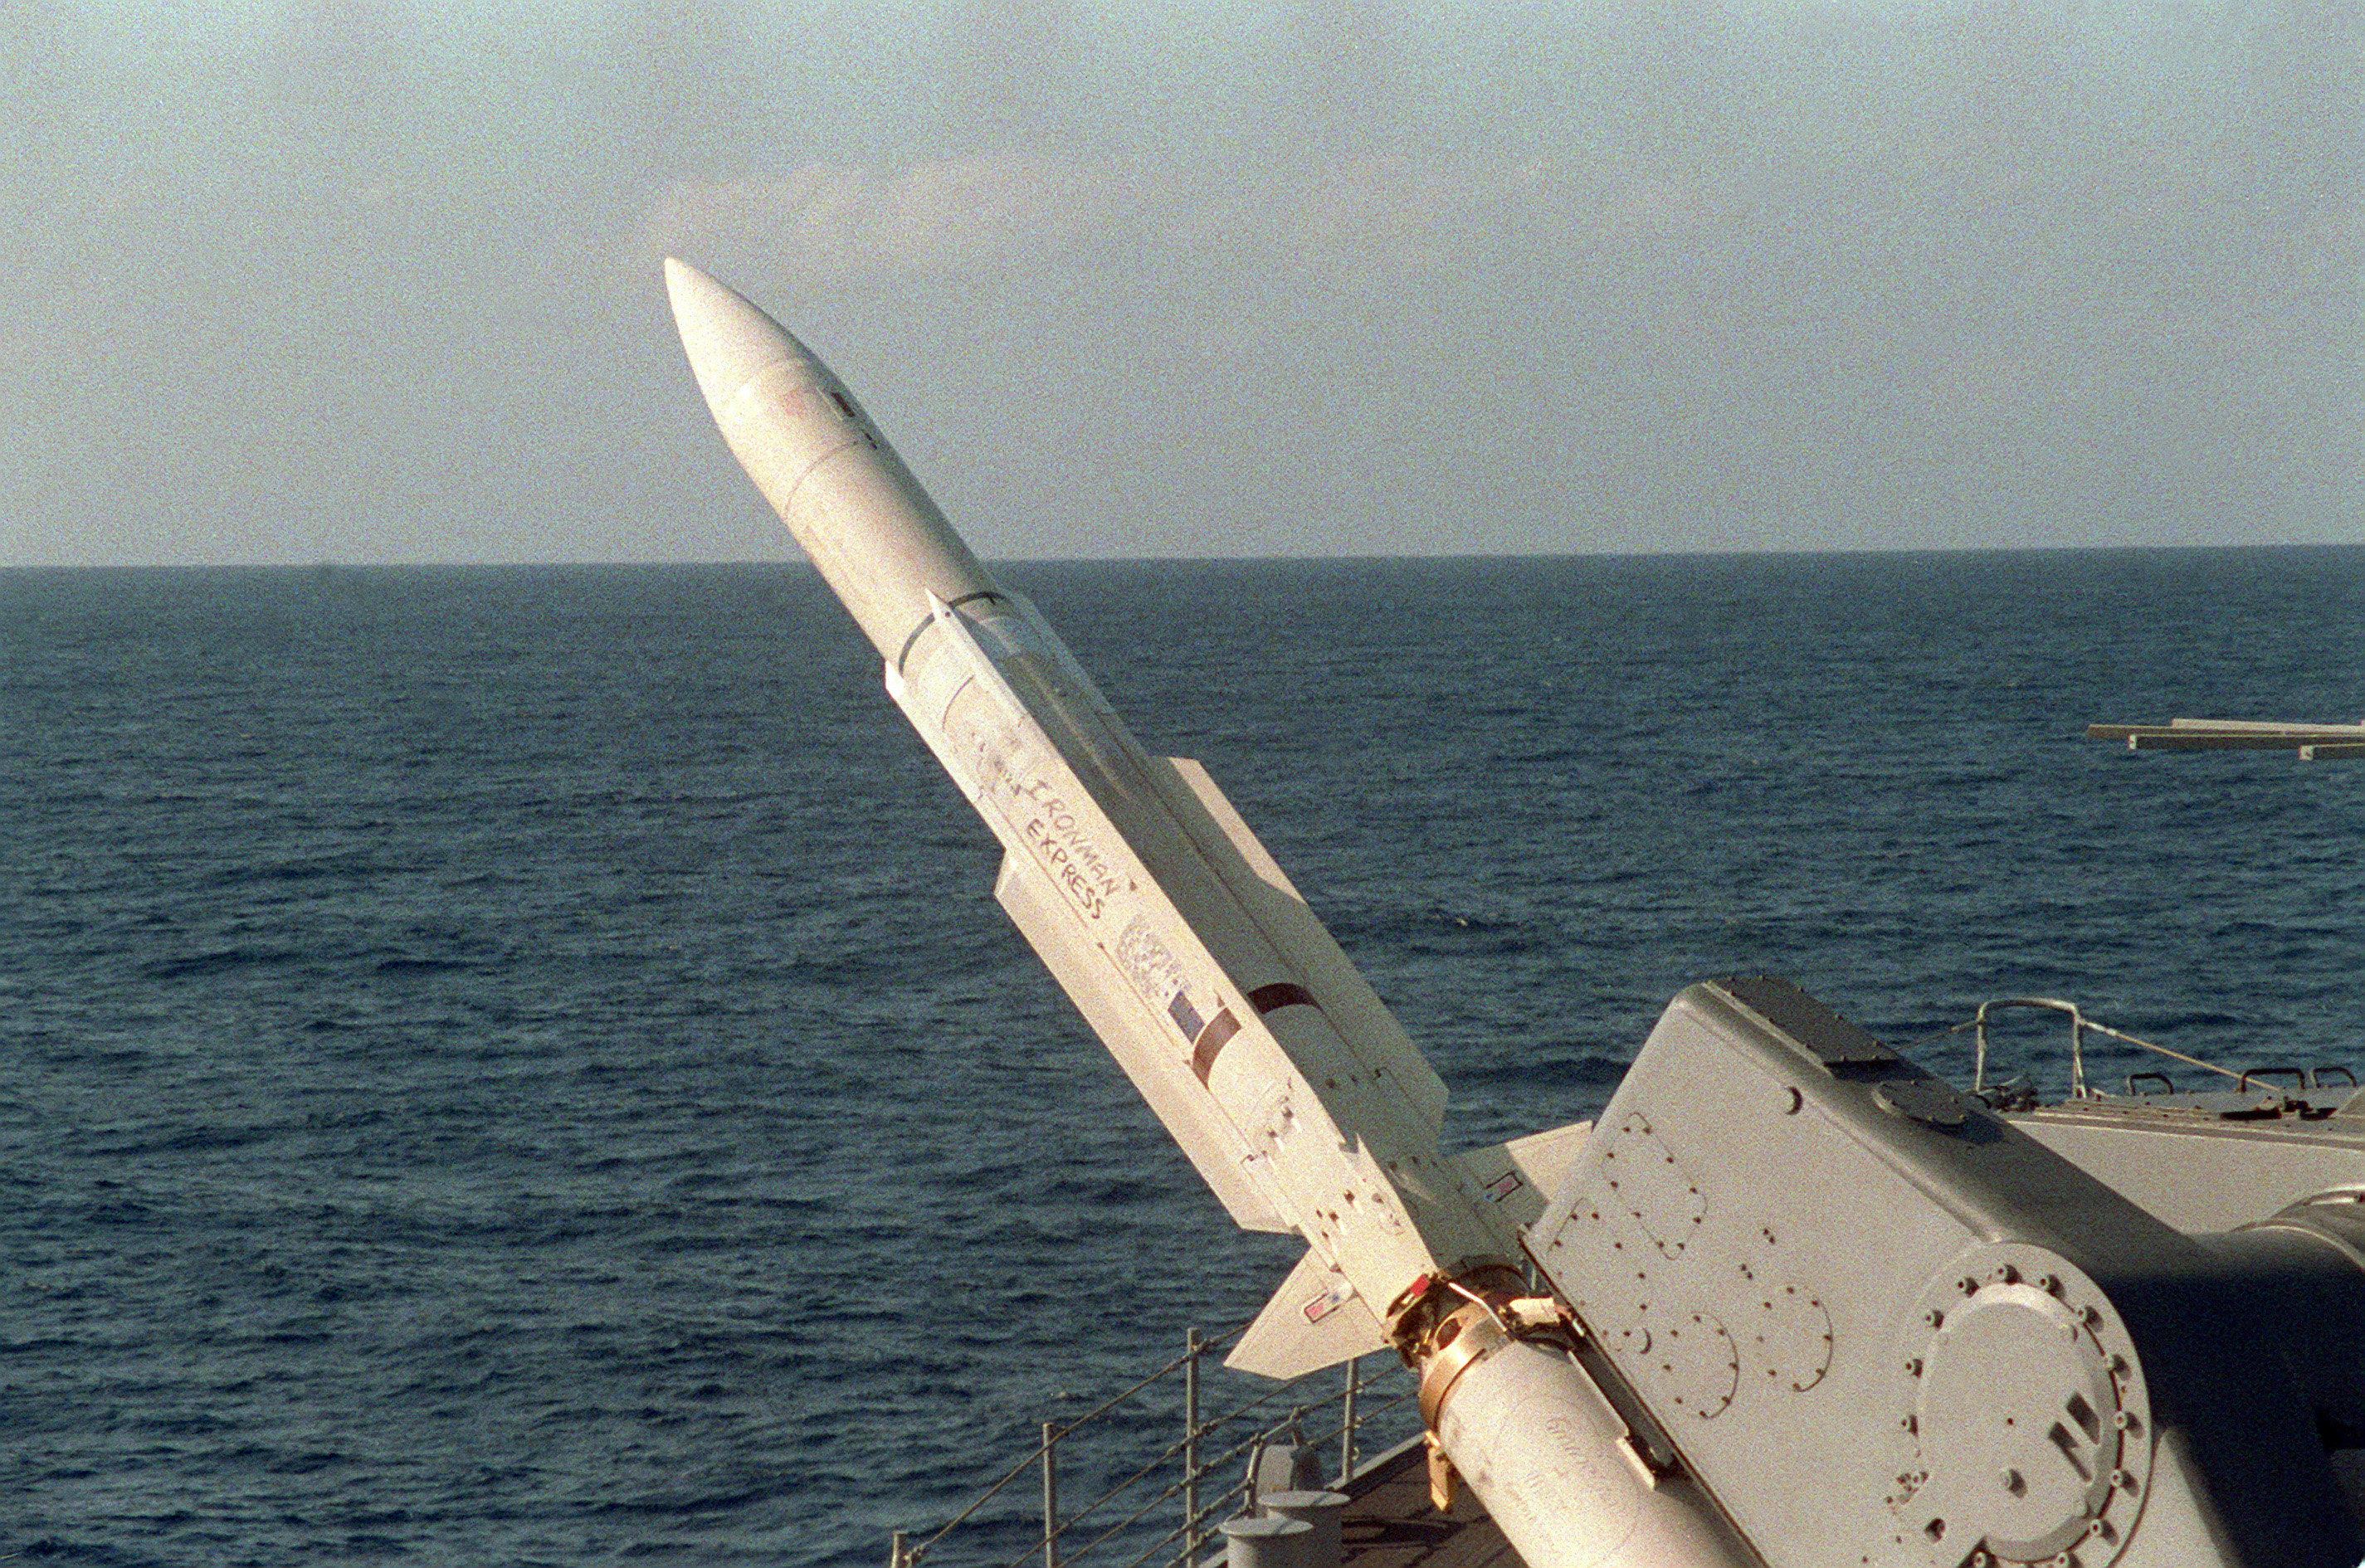 A view of an RIM-67B Standard (SM-2ER) surface-to-air missile on its launch platform aboard a guided missile cruiser.